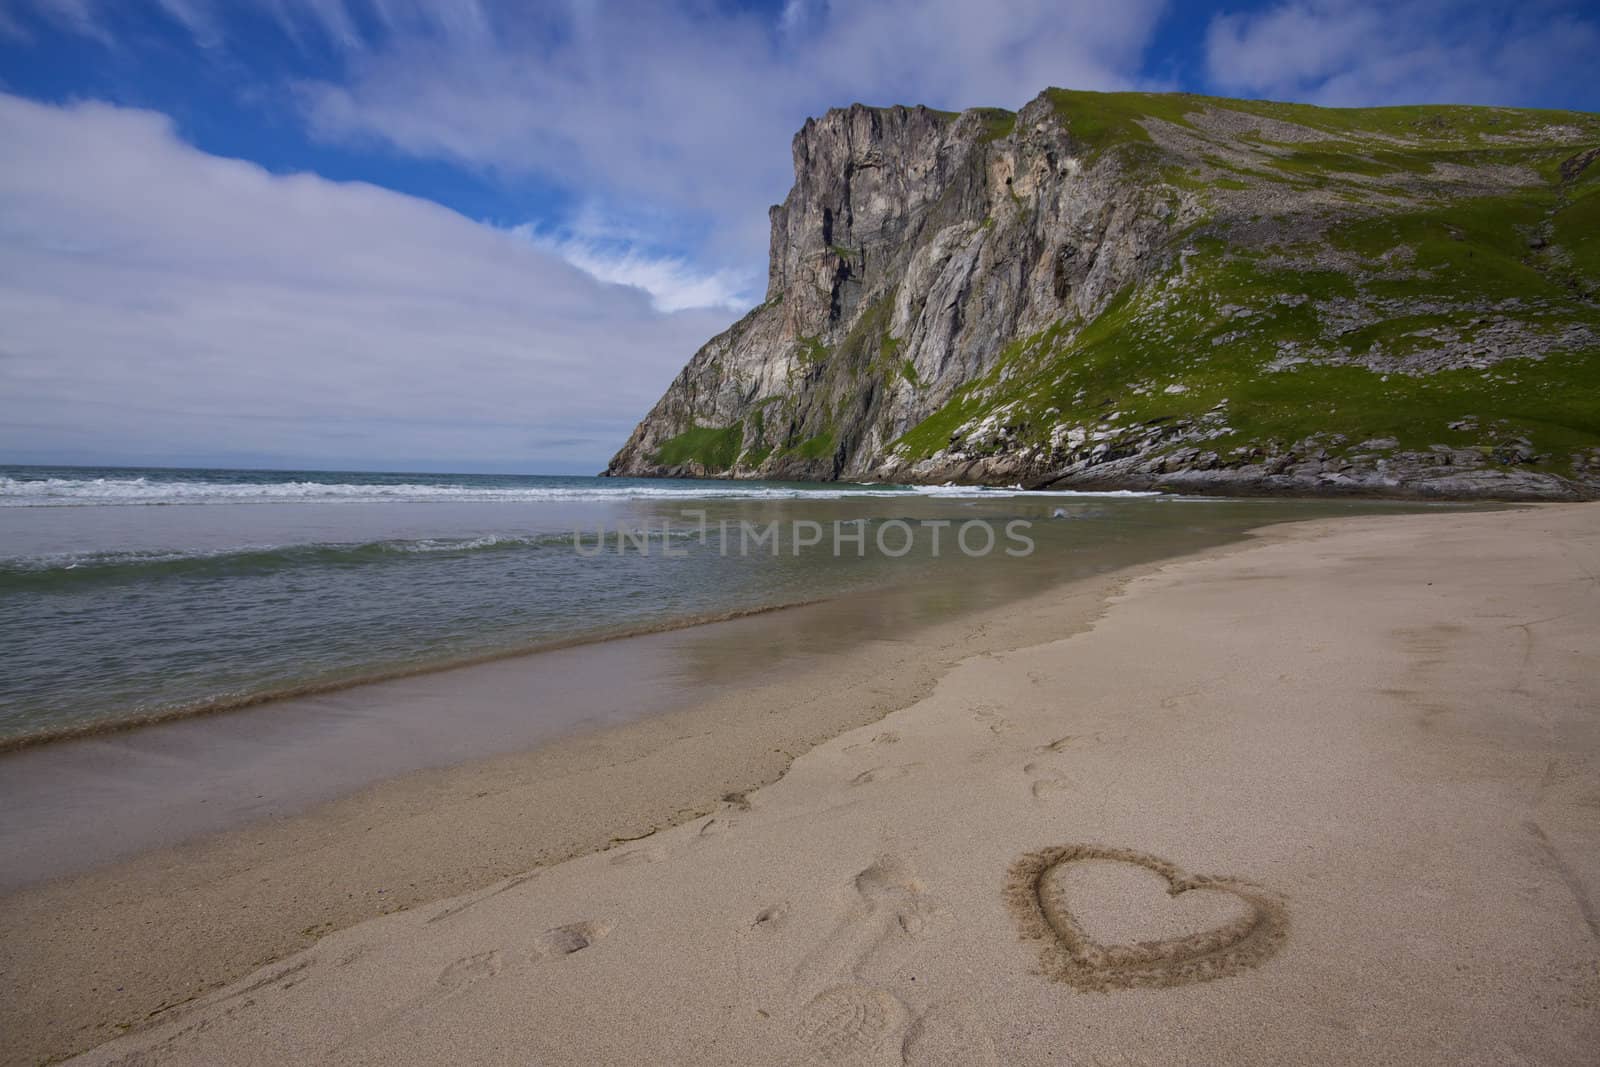 Symbo lof love in the sand on a picturesque beach on Lofoten islands